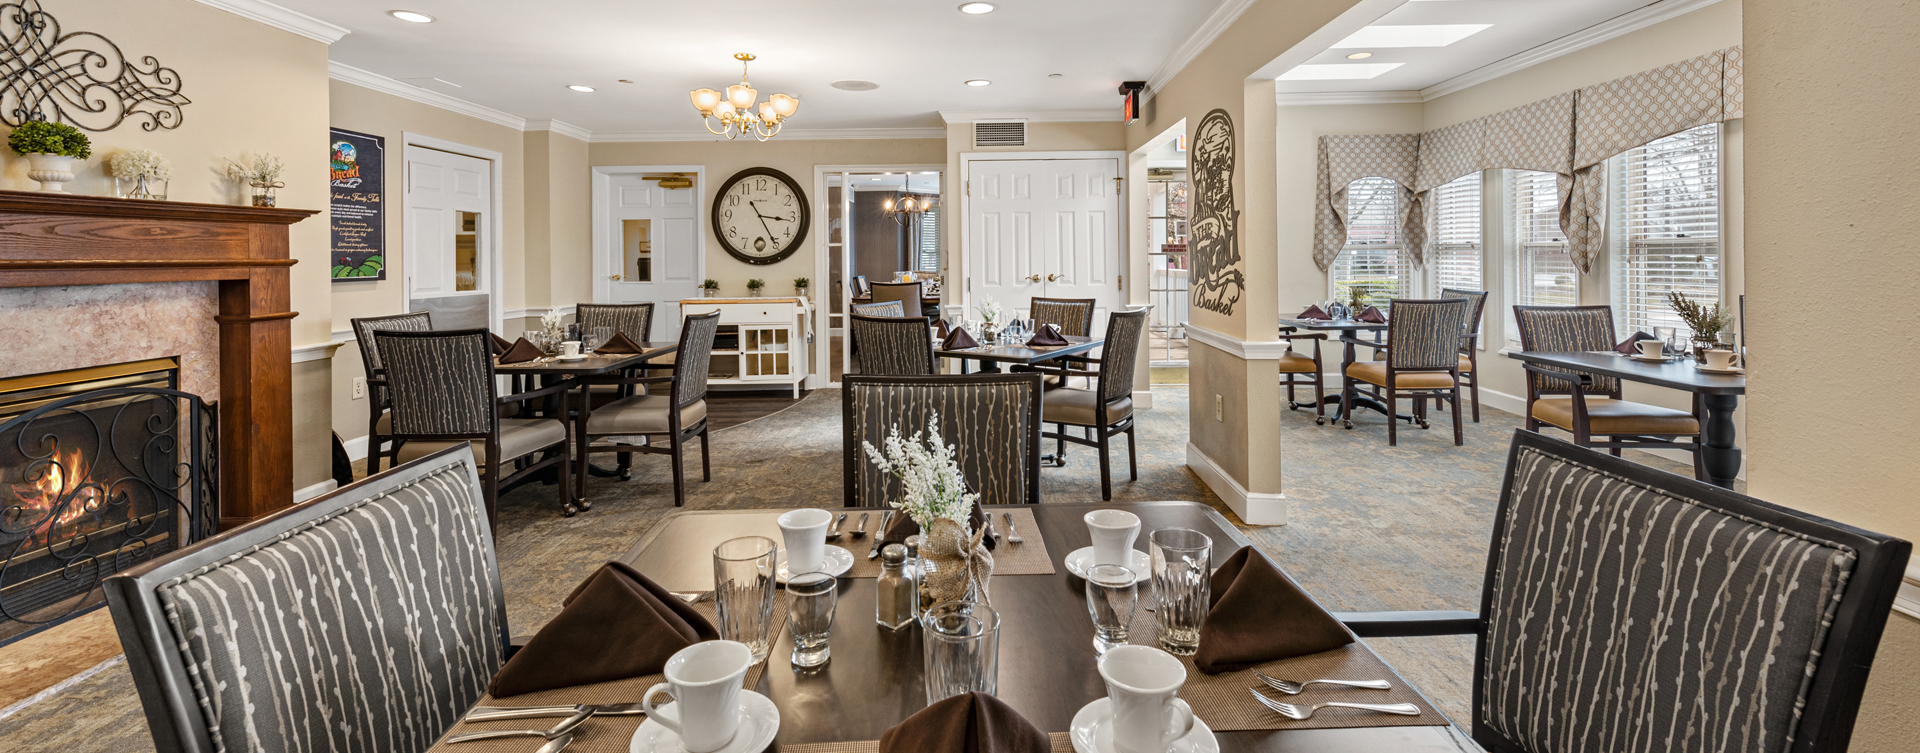 Enjoy homestyle food with made-from-scratch recipes in our dining room at Bickford of Bexley